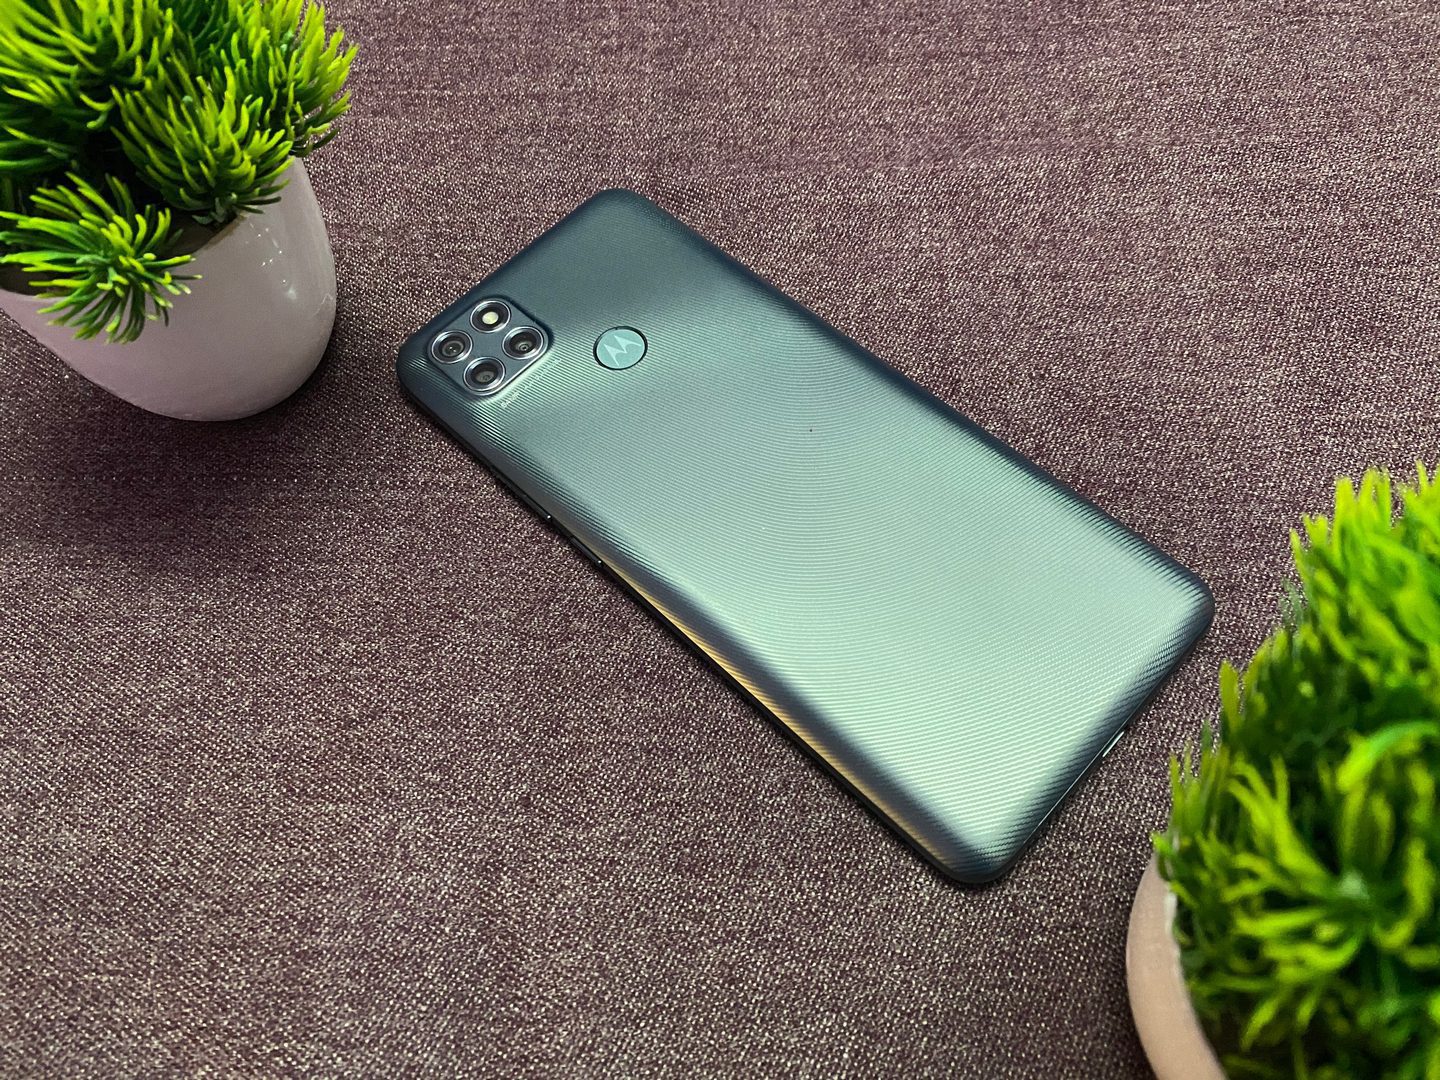 Moto G9 Power Review
